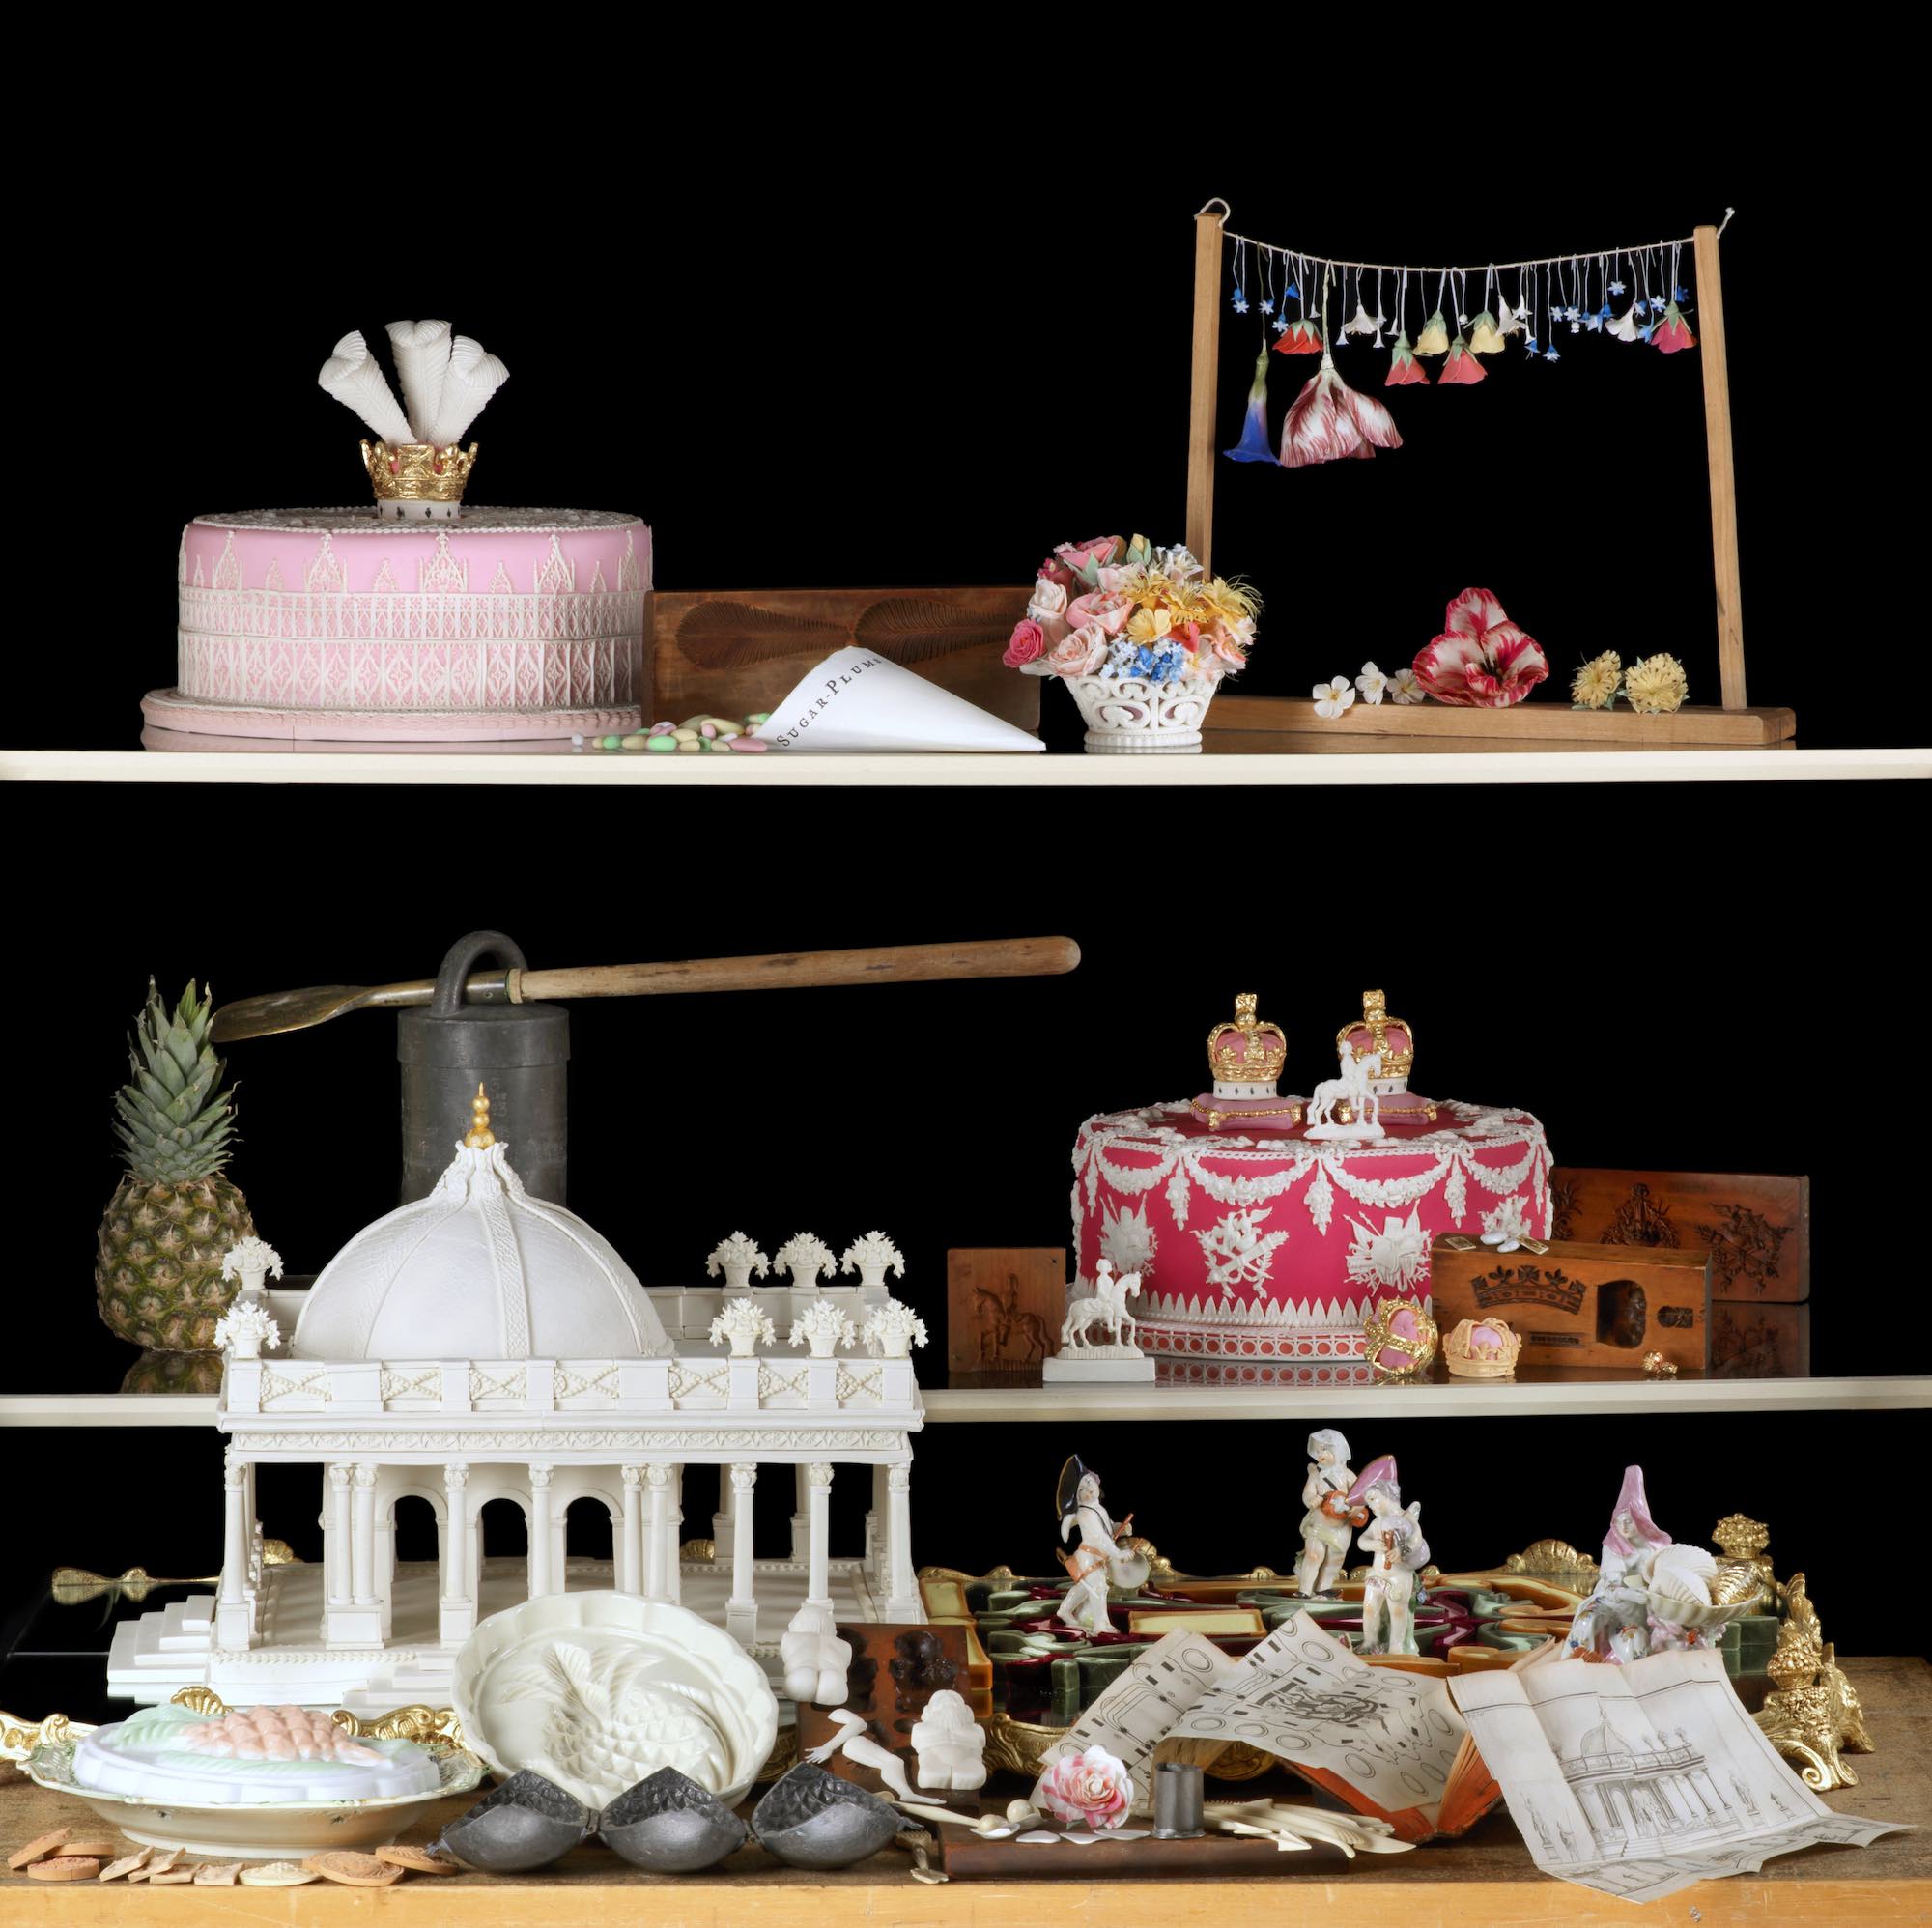 A view of an English 18th-century confectioner’s shop window and workspace the sugar banquet.